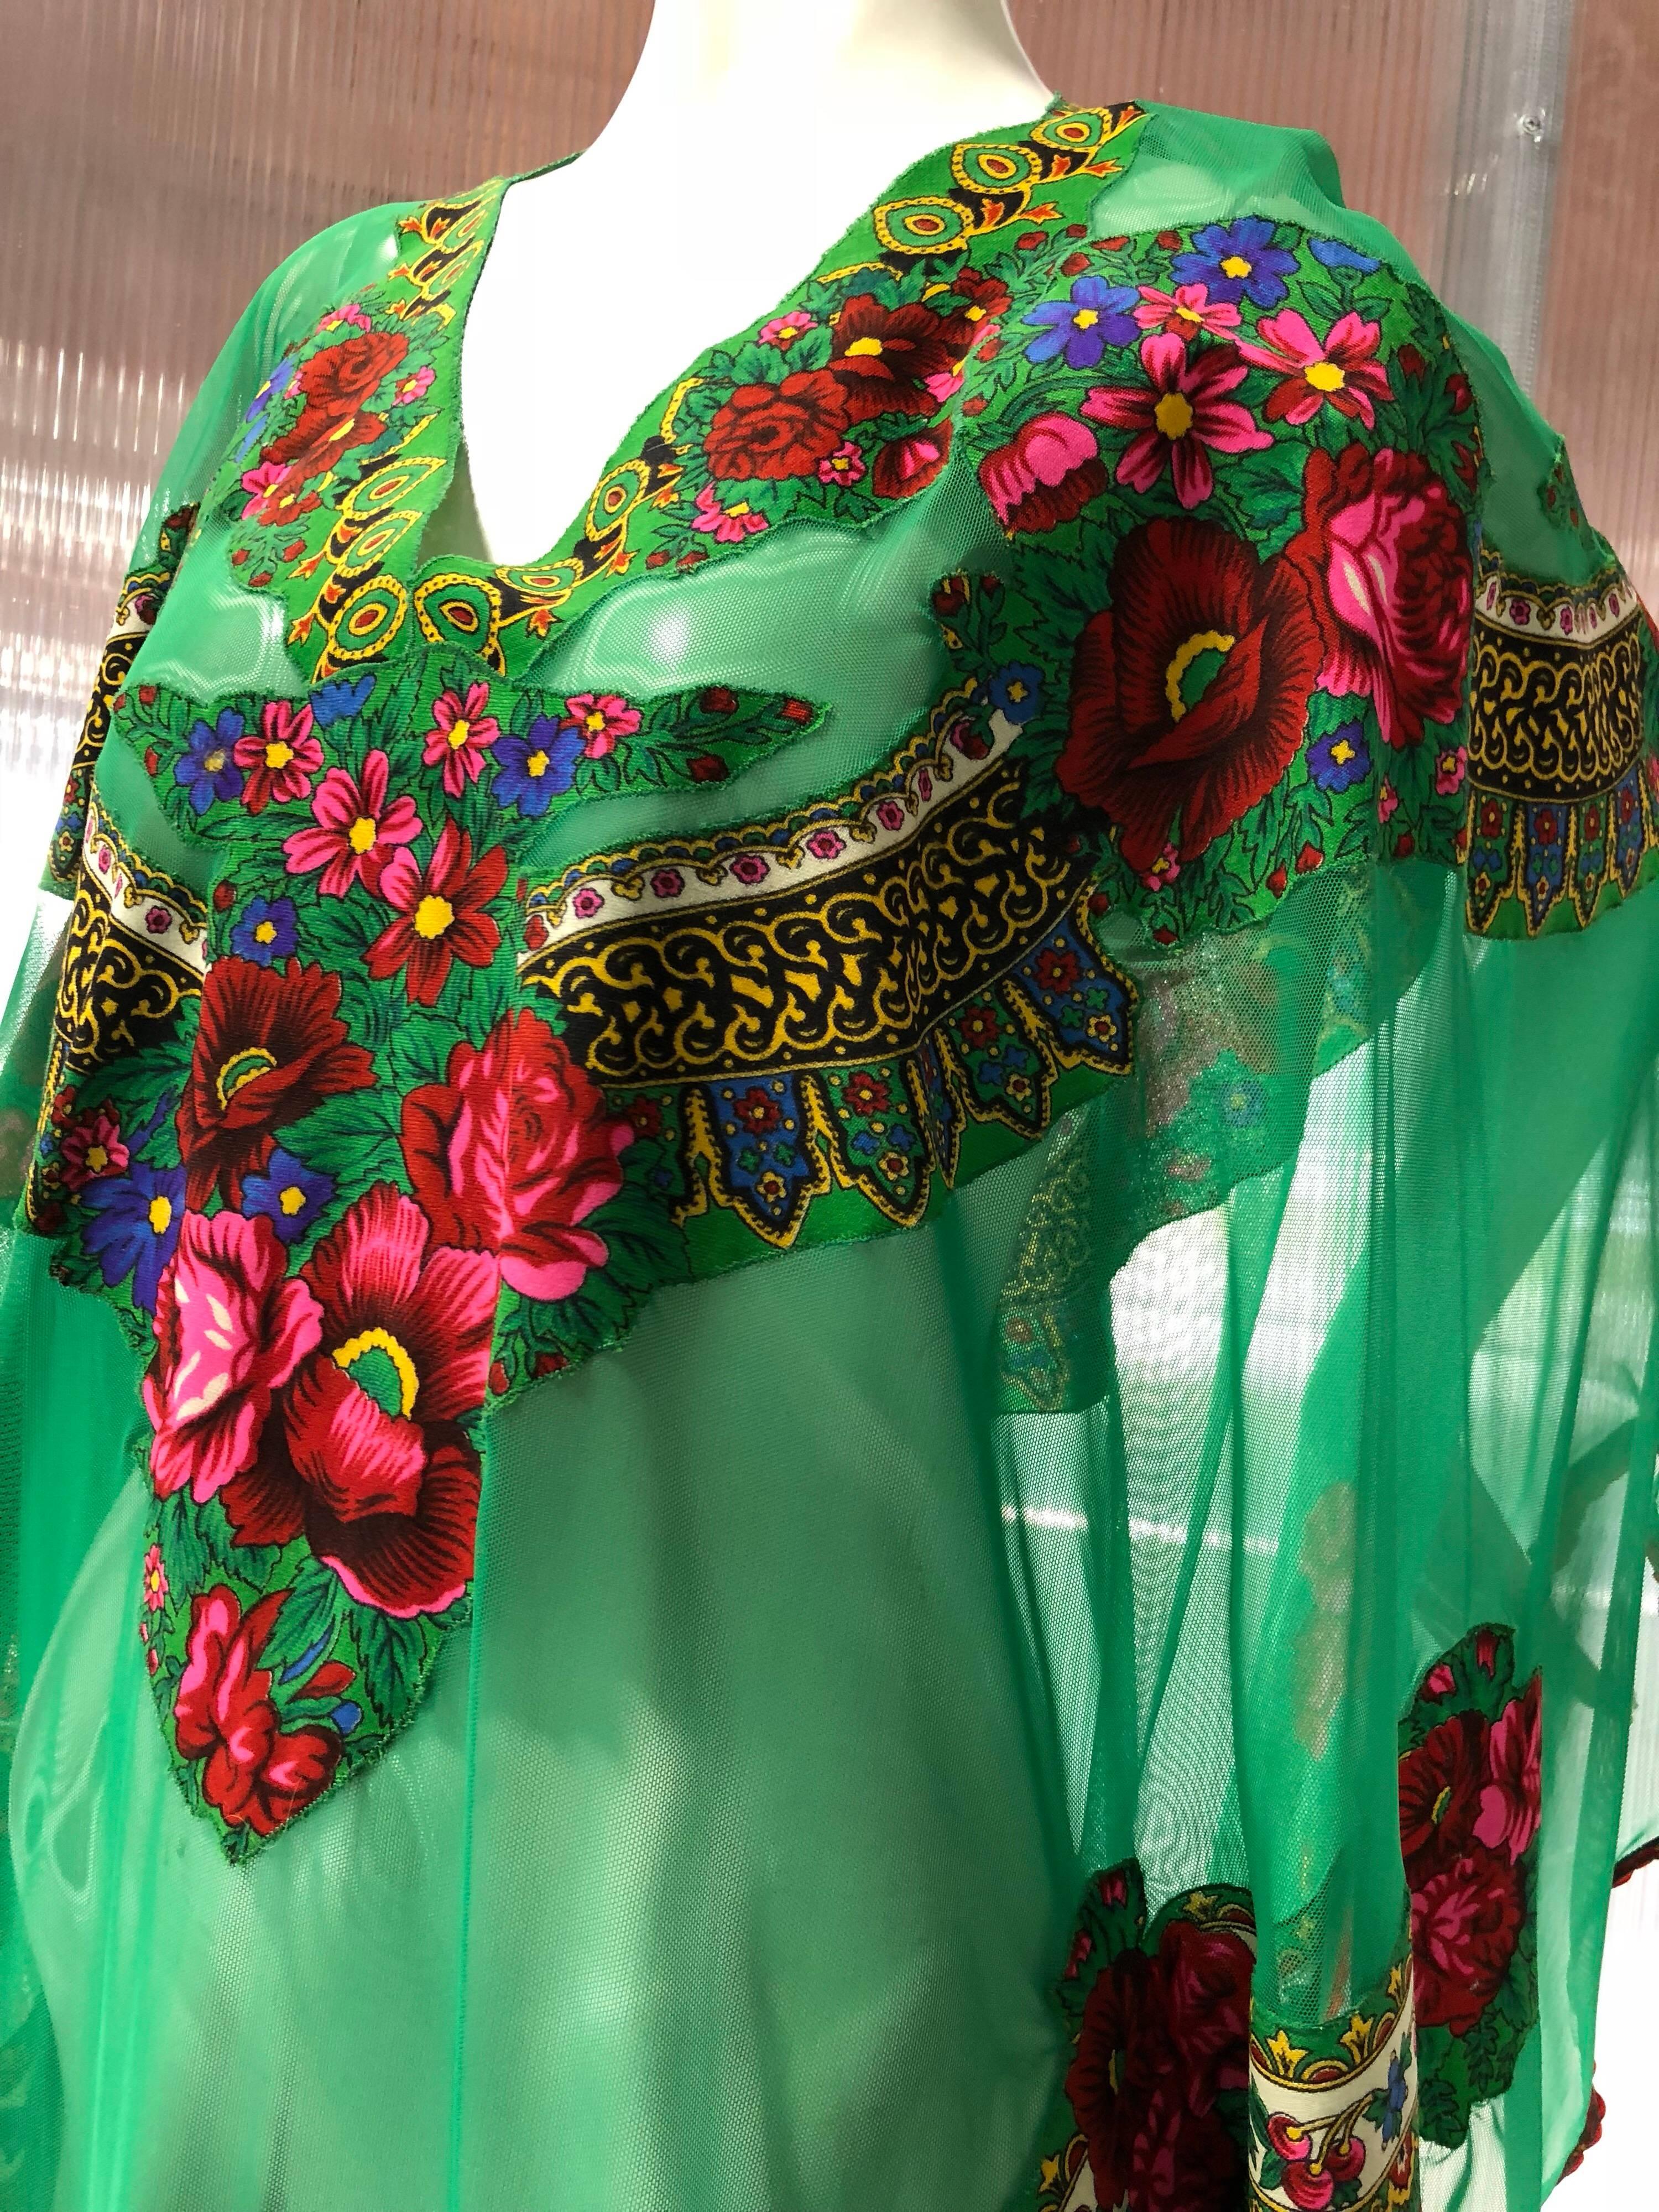 Russian-style Gypsy floral applique emerald green net caftan with floral ribbon trim has been fashioned from a vintage Ukranian wool challis textile. Voluminously cut--great for a swimsuit cover-up or a vacation get-away! Fits up to US size 10.